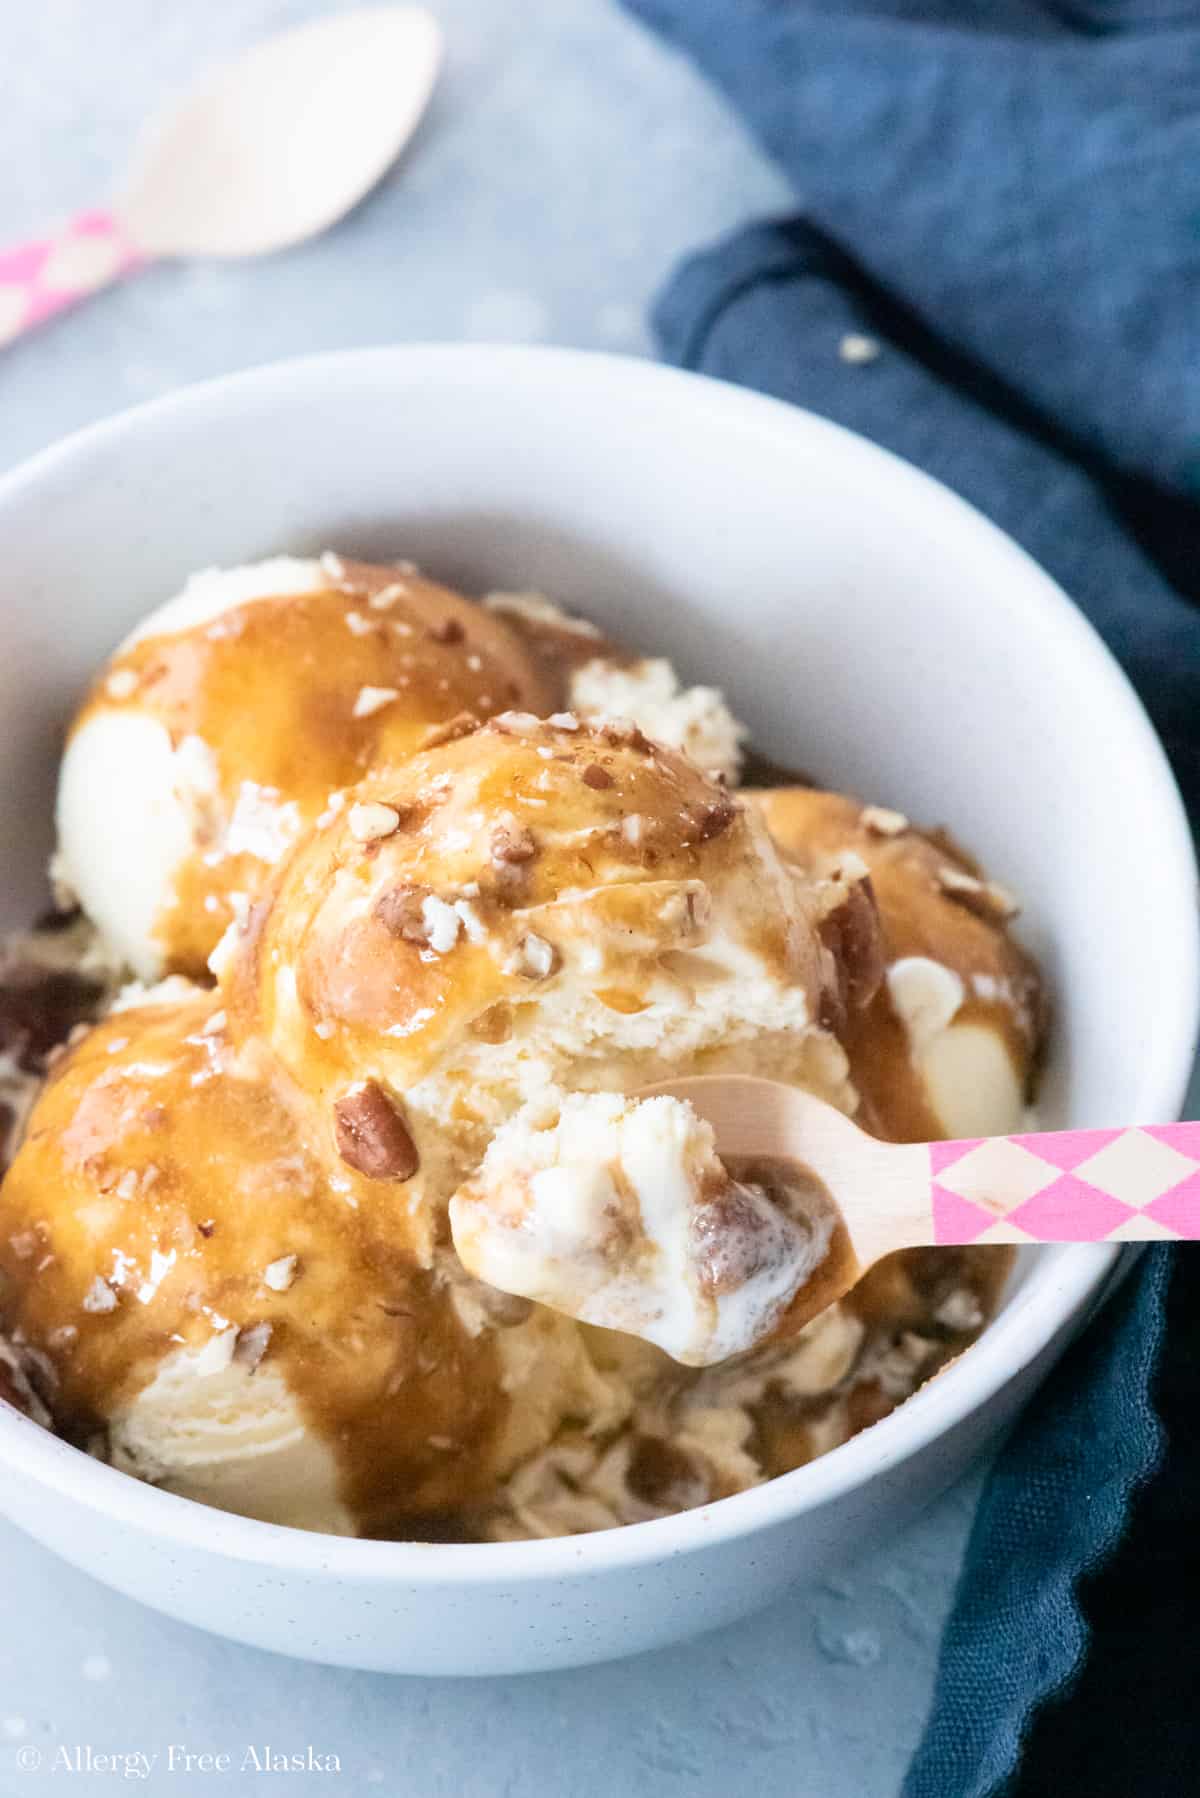 vanilla ice cream covered in vegan caramel sauce and chopped pecans, in white bowl on blue background. Pink and natural pattered spoon getting spoonful.